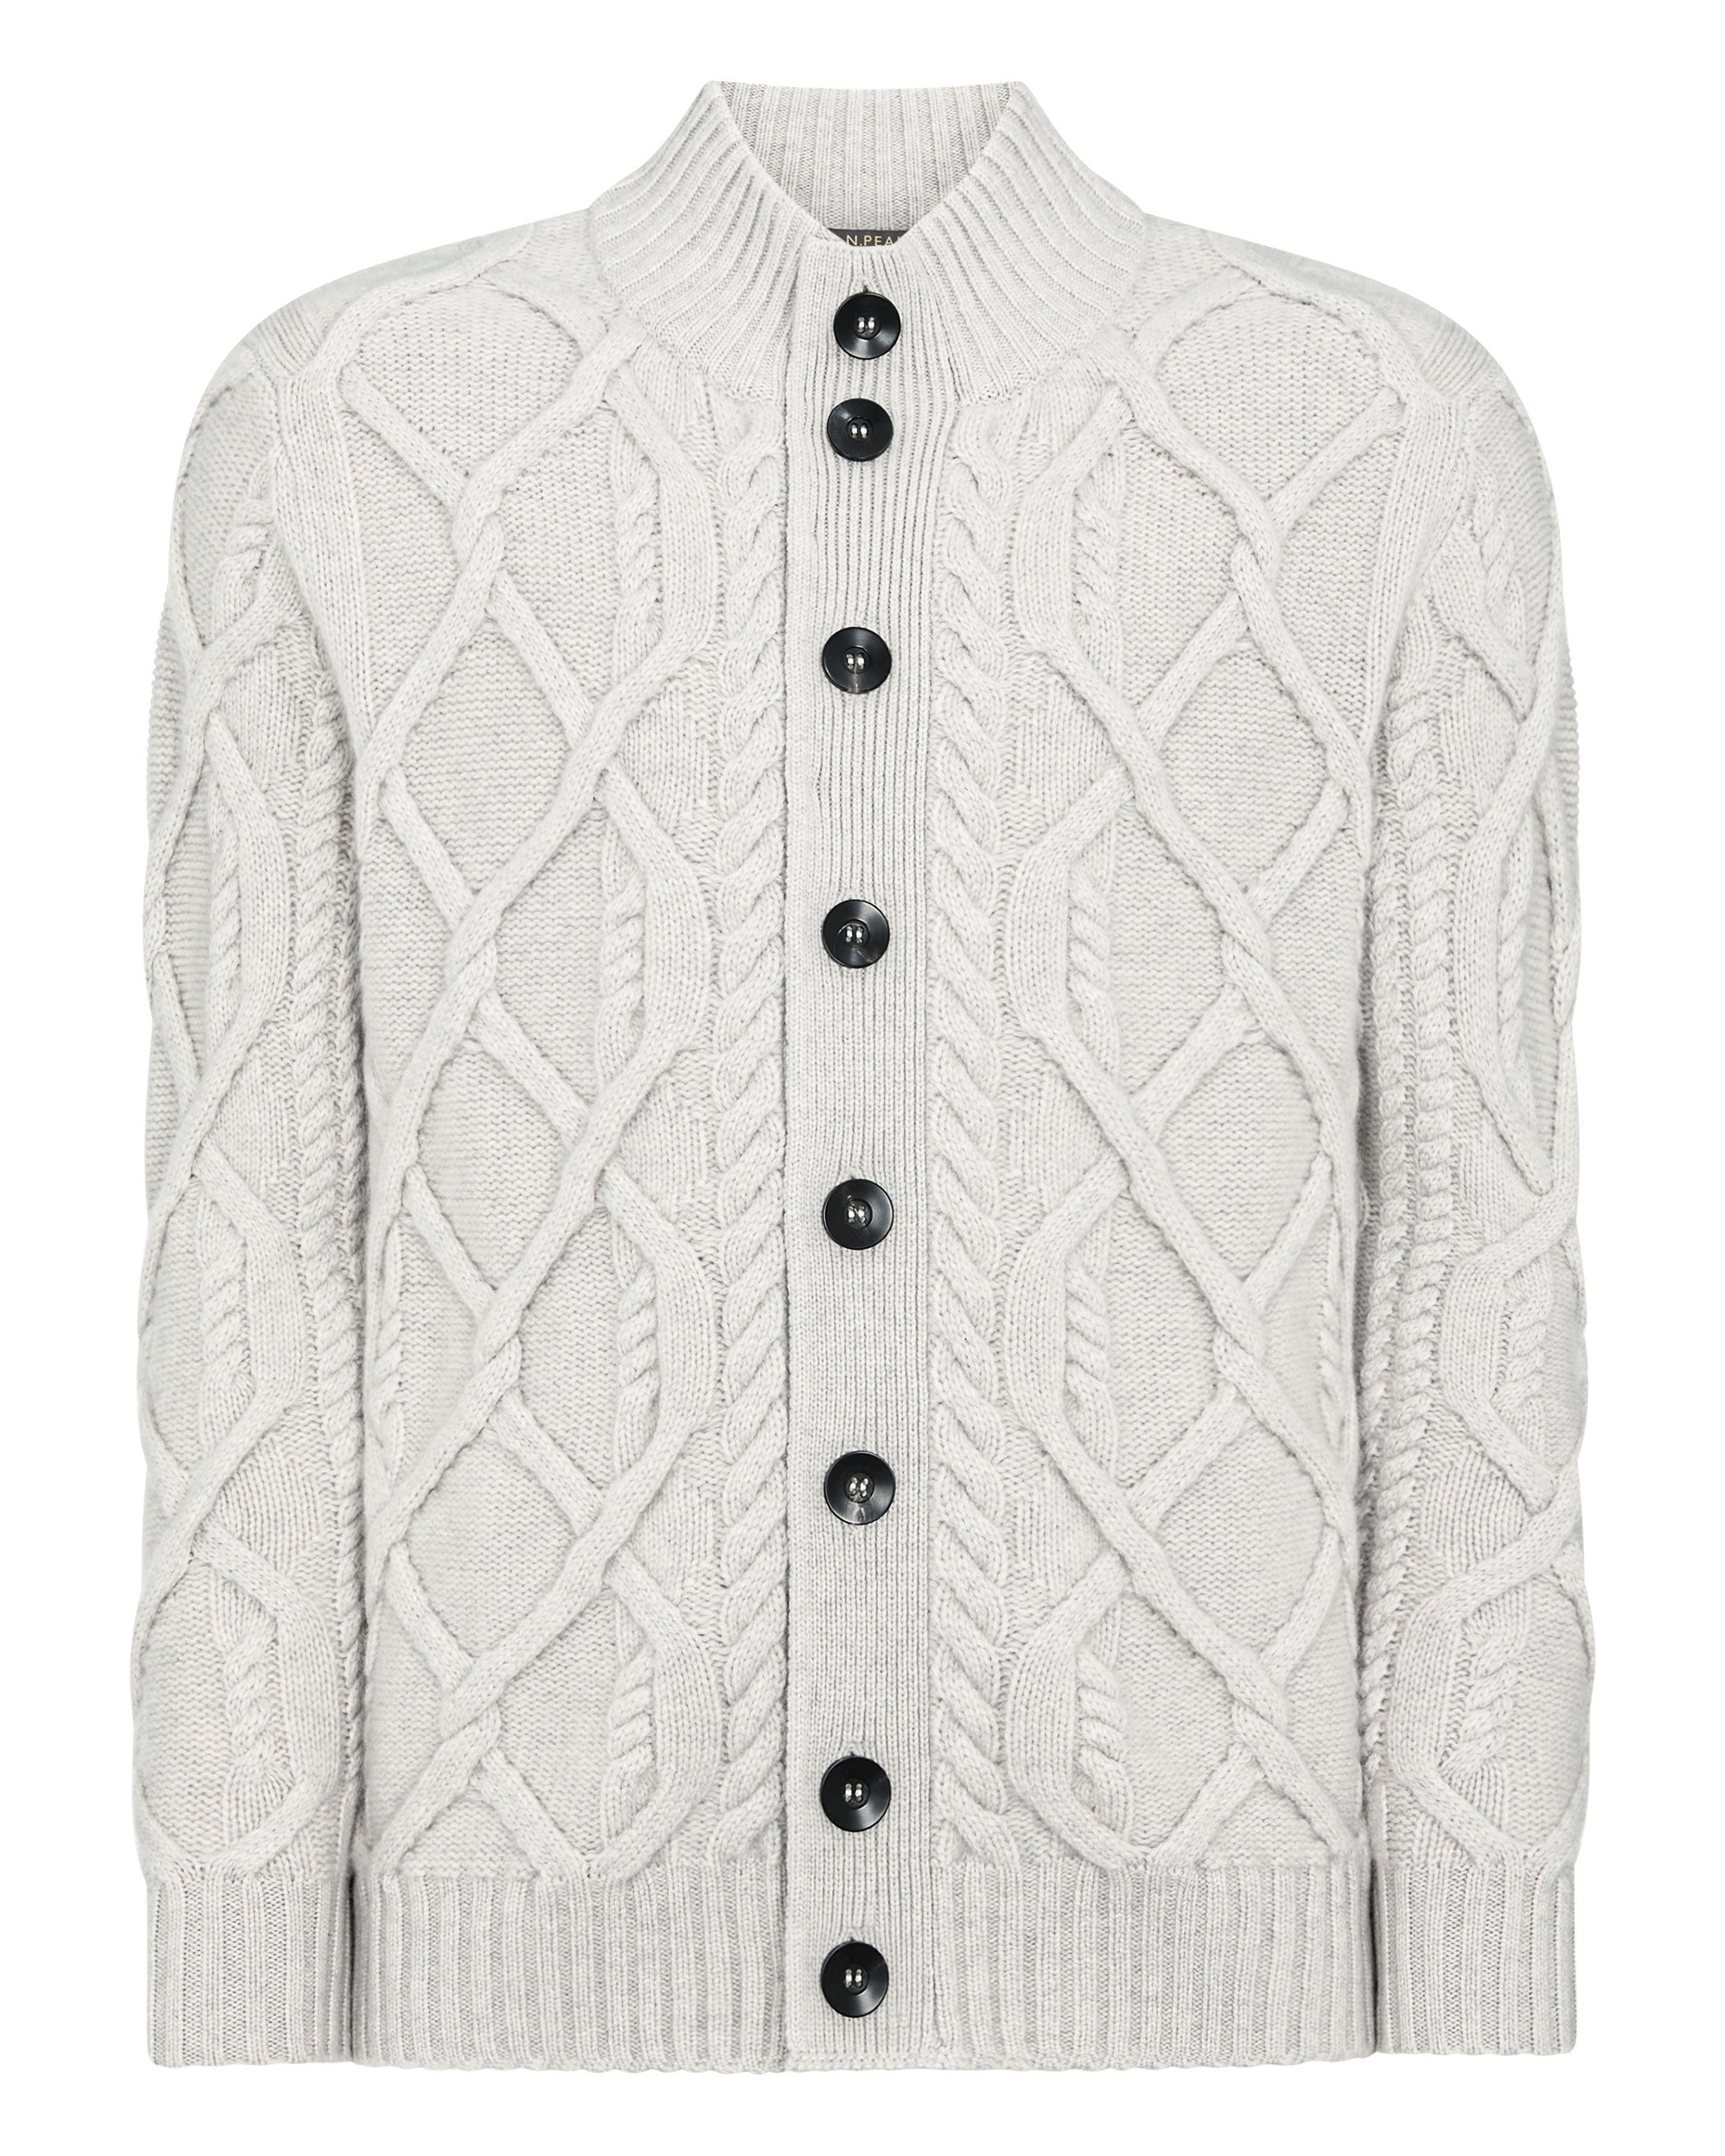 N.Peal buttoned-up cashmere cardigan - Grey